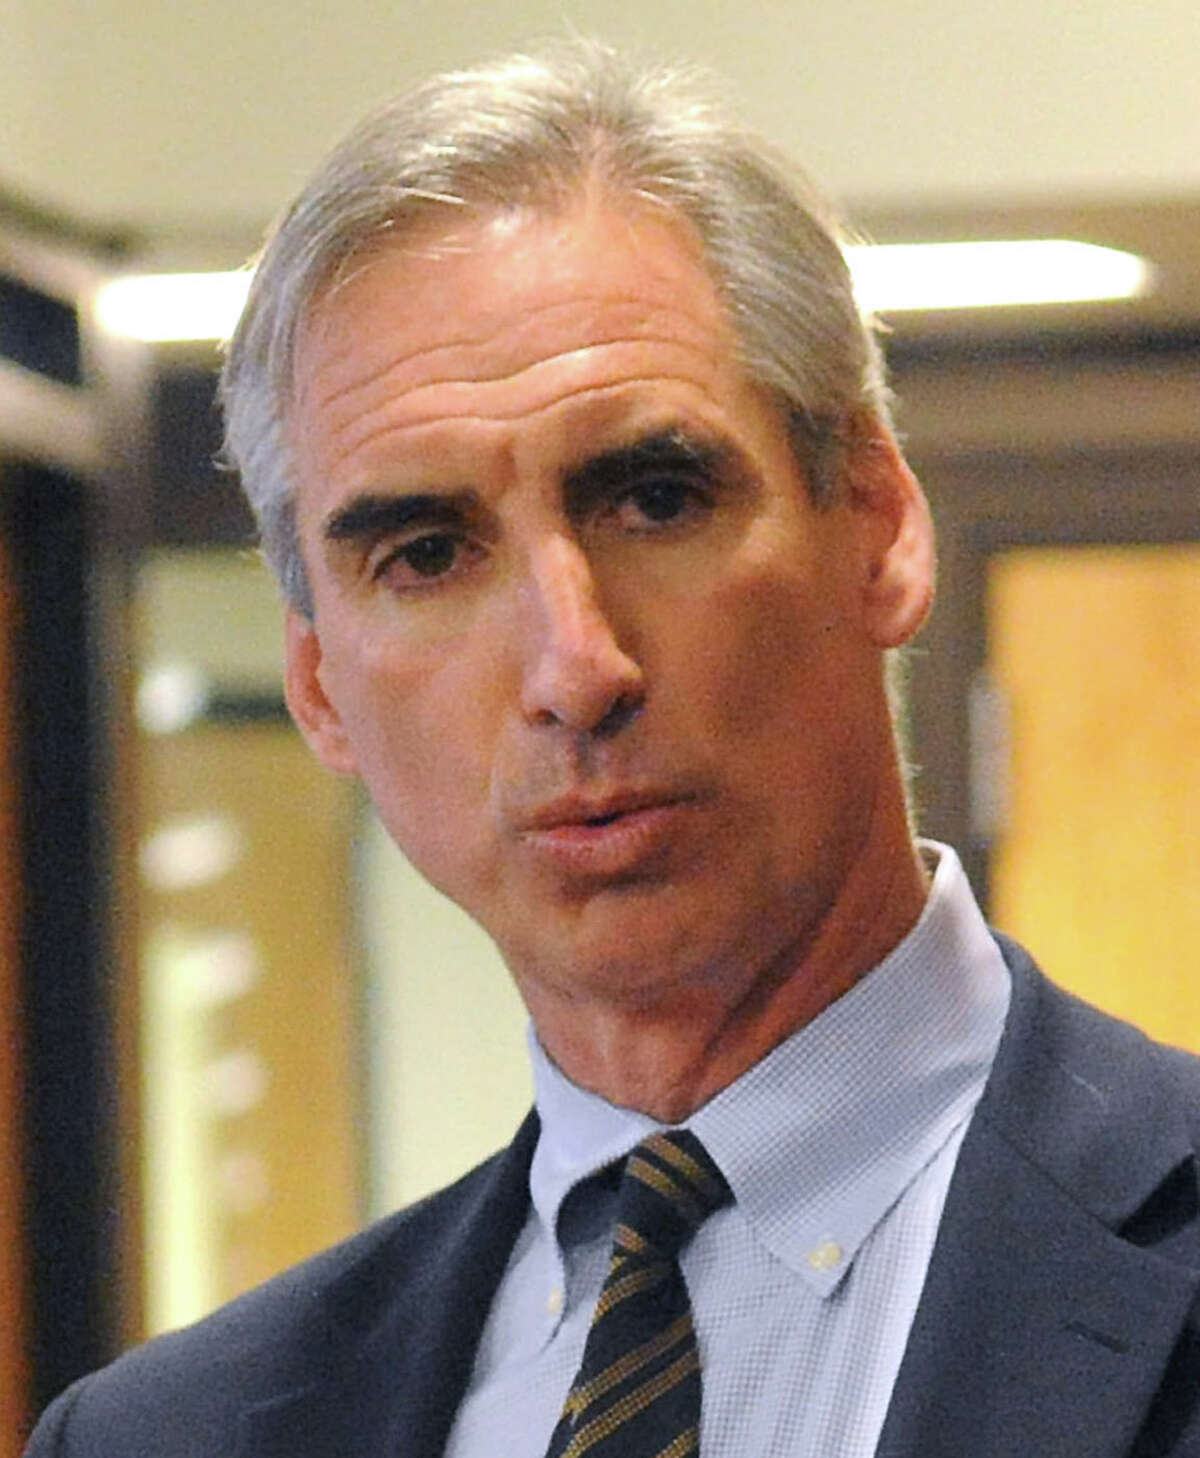 Oliver Luck, seen as West Virginia University’s athletic director and now with the NCAA, says there were no hard feelings from fellow officials at Big 12 schools in the wake of choosing Ohio State over TCU and Baylor for the College Football Playoff.